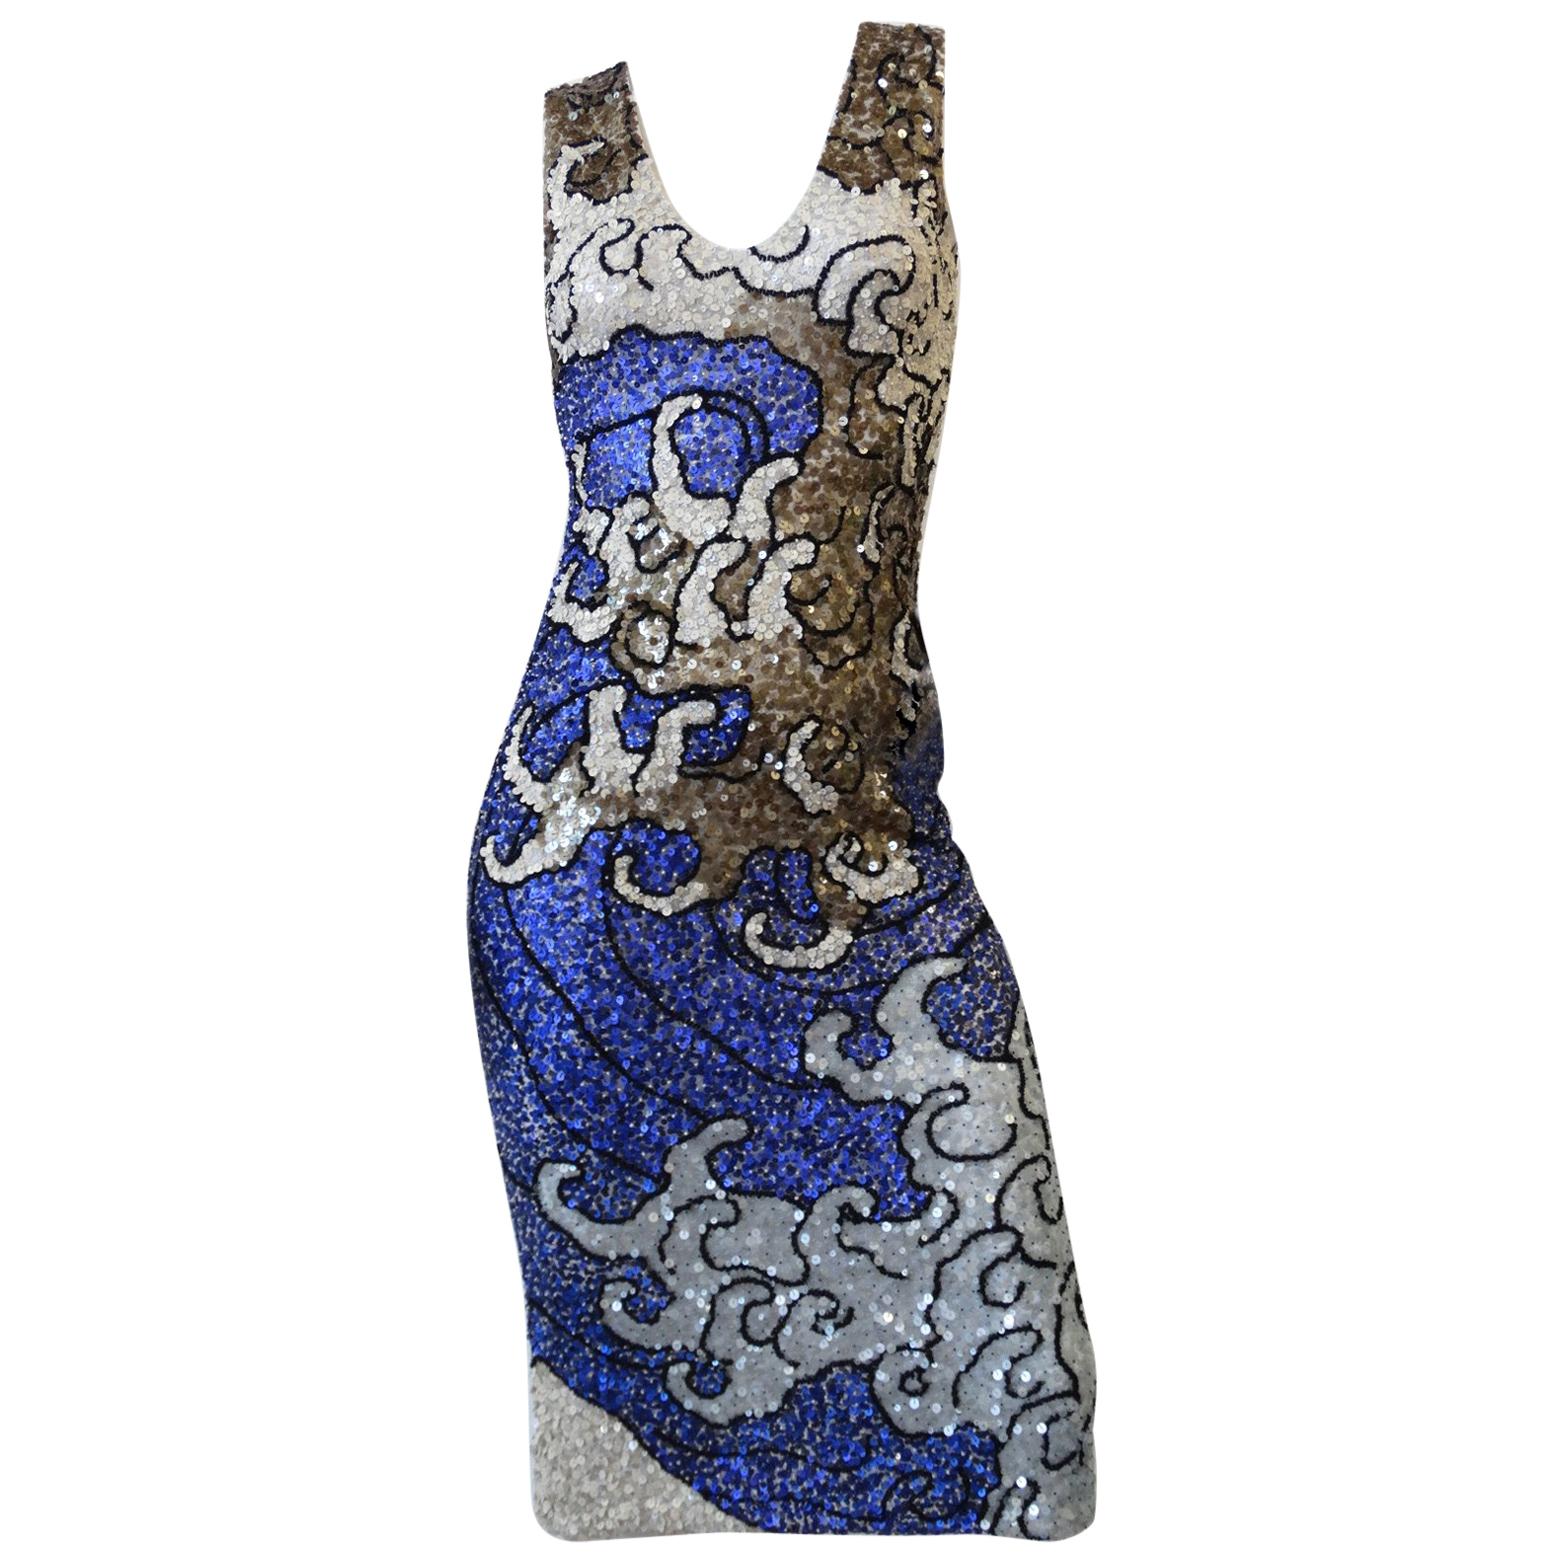 Farah Khan "The Great Wave" Inspired Sequined Tank Dress